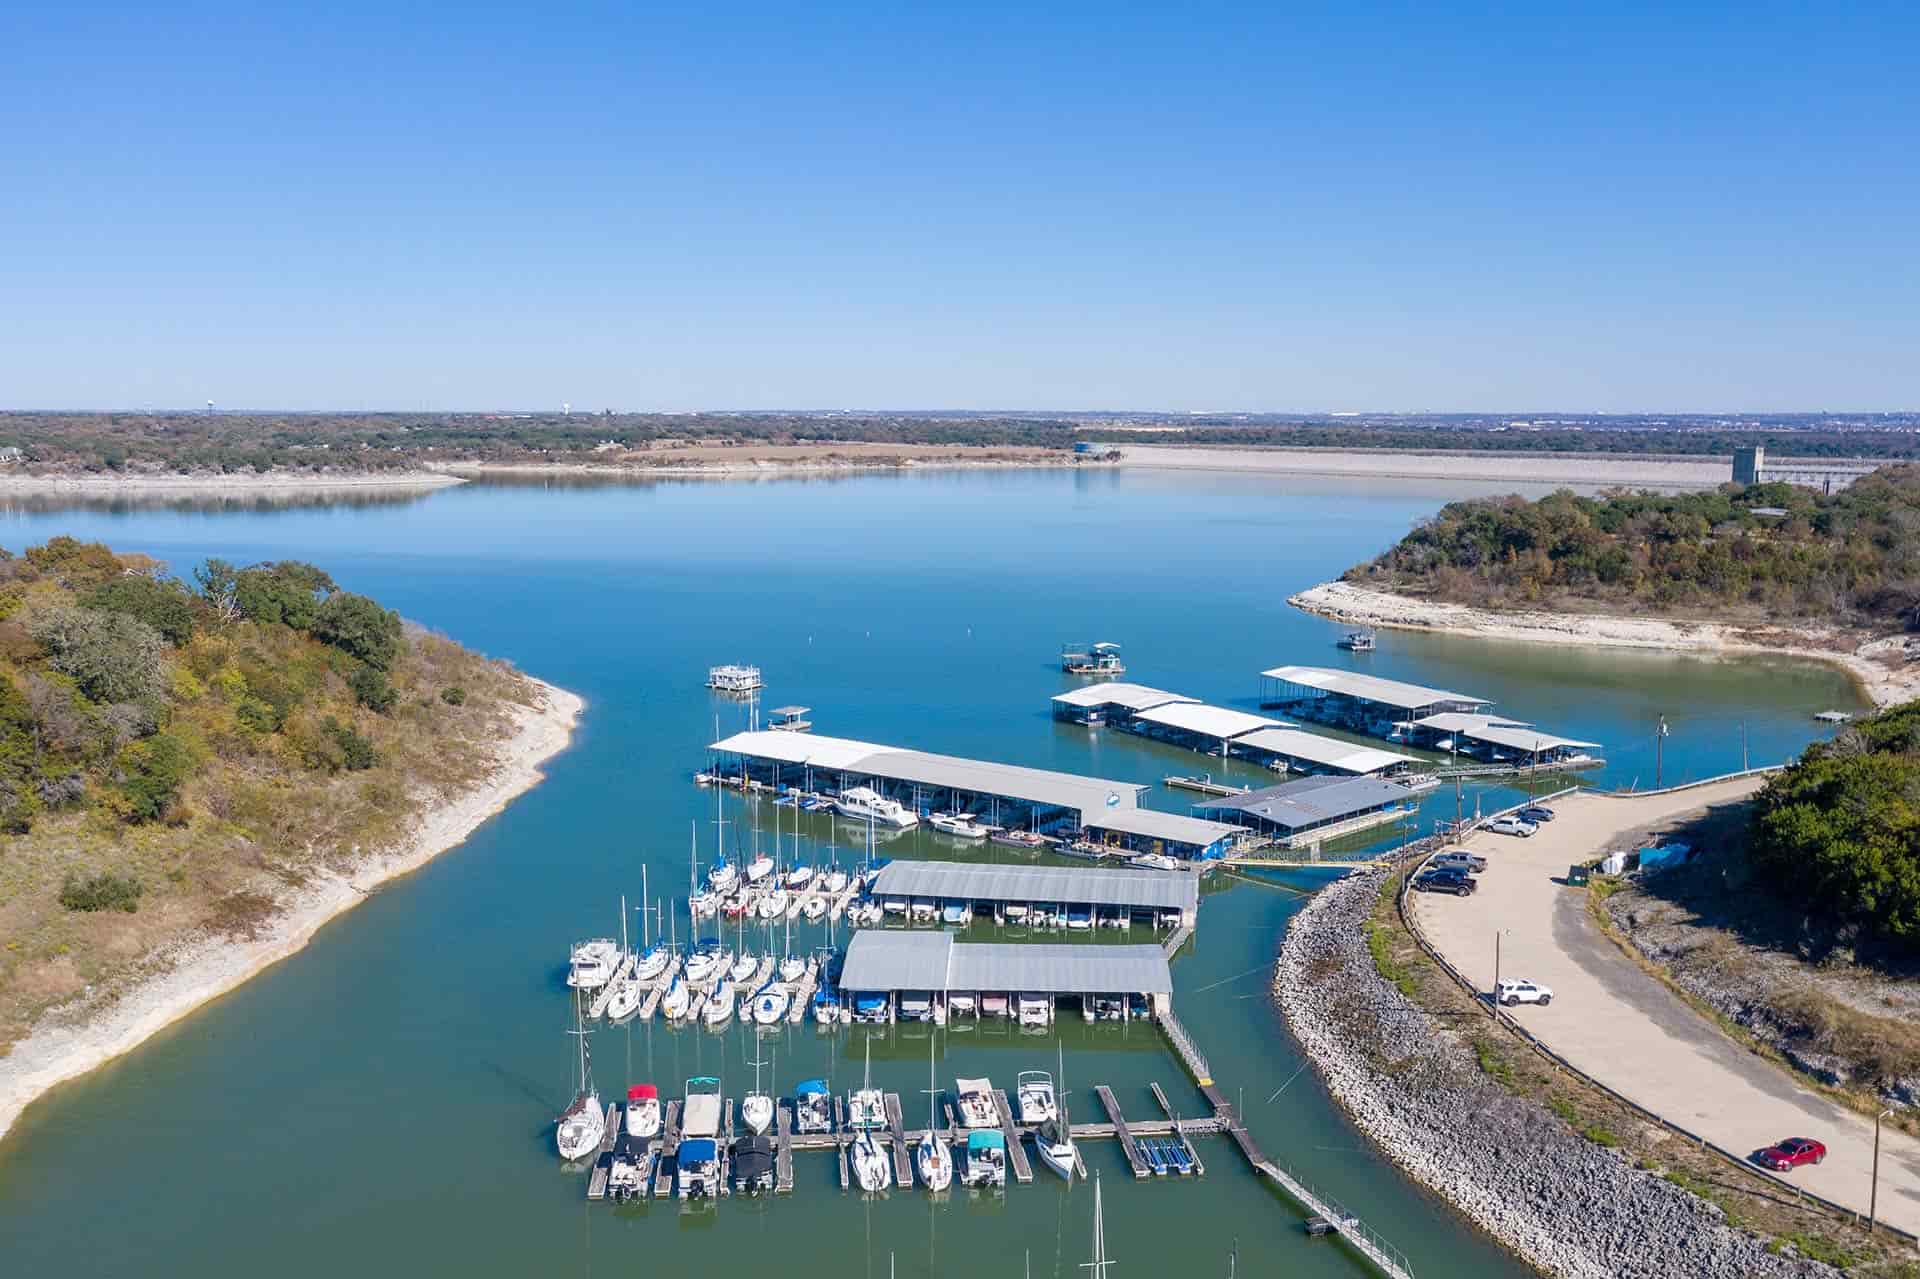 Bird's eye view of a marina in West Temple